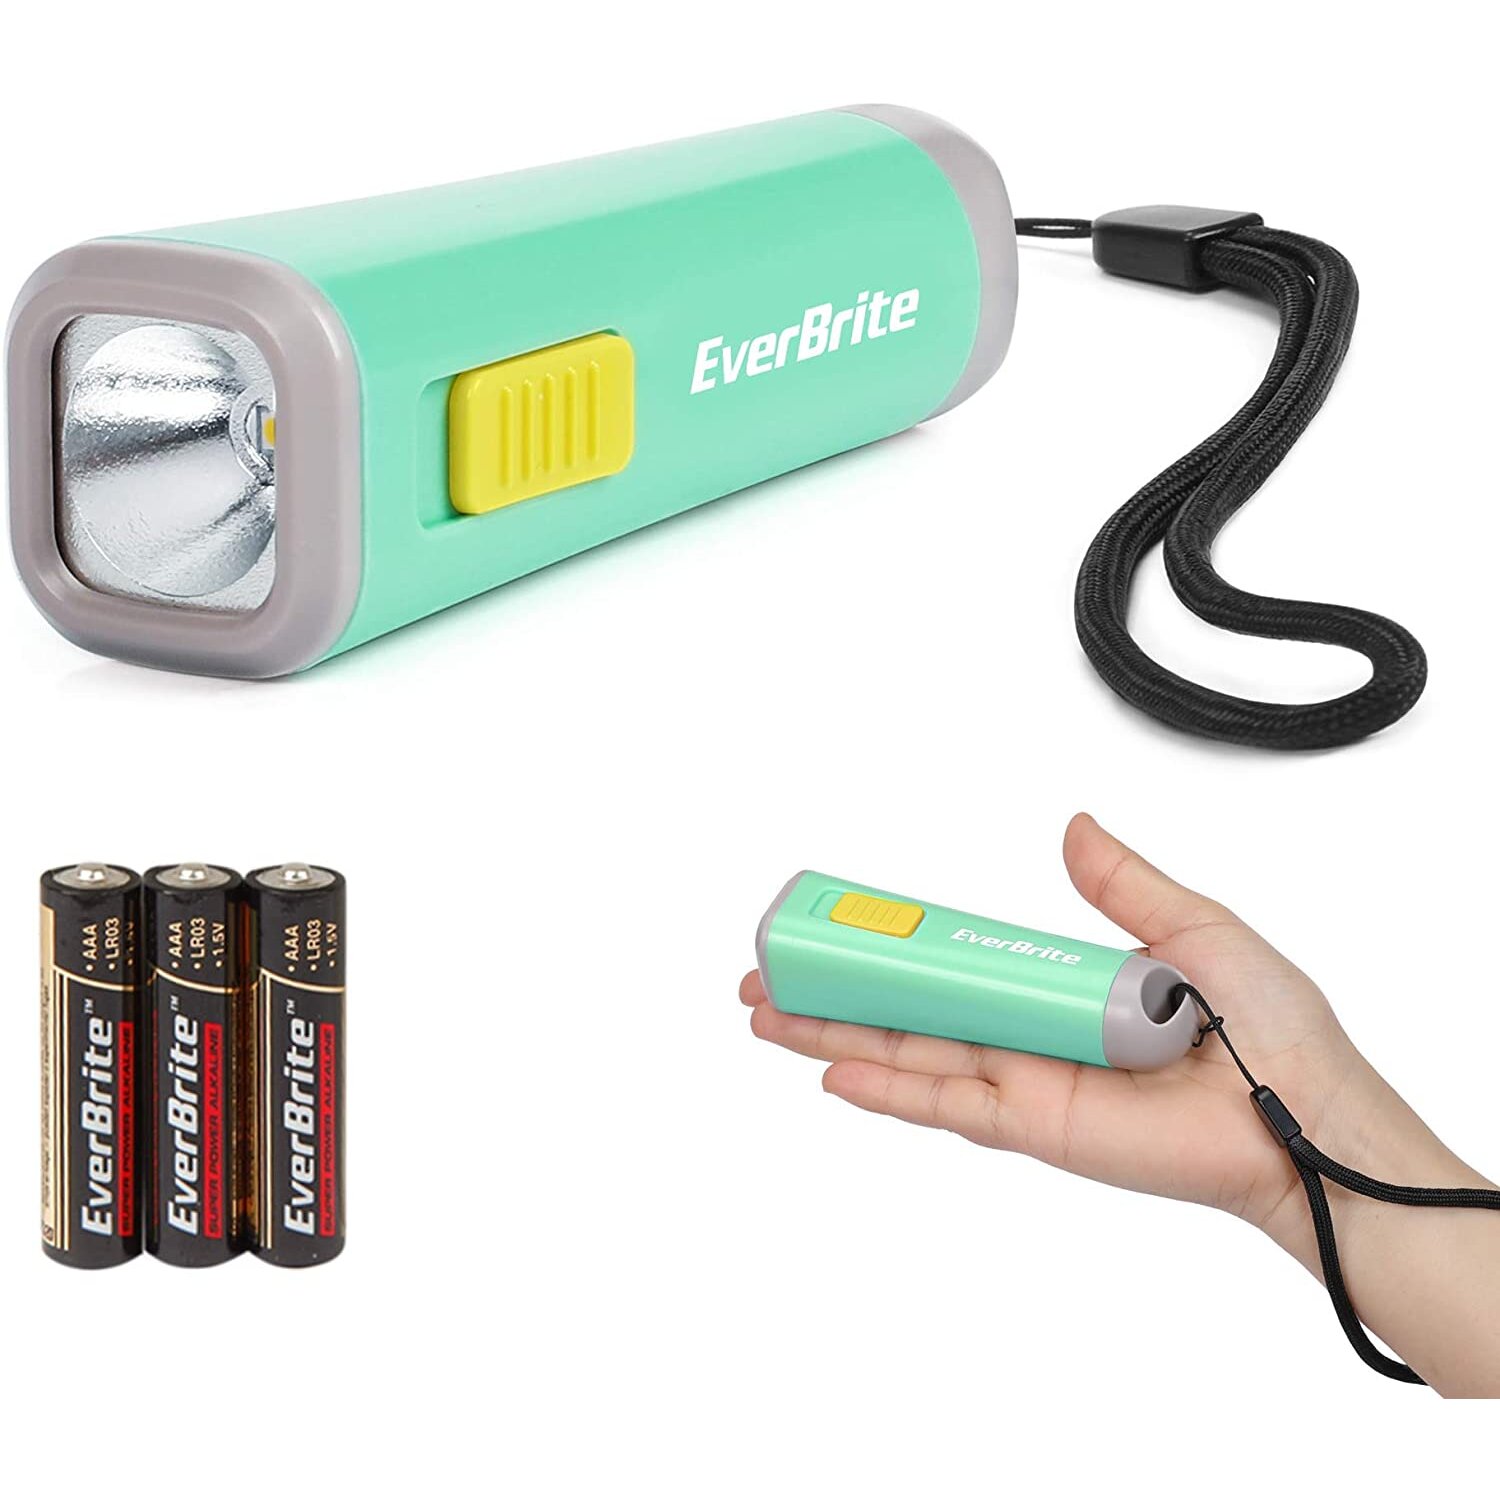 EverBrite Mini LED Kids Flashlight (Green), Kids Torch Light Weight (46g) with Yellow Light, Ideal for Reading, Camping, Walking, Asking for Help, 3 A